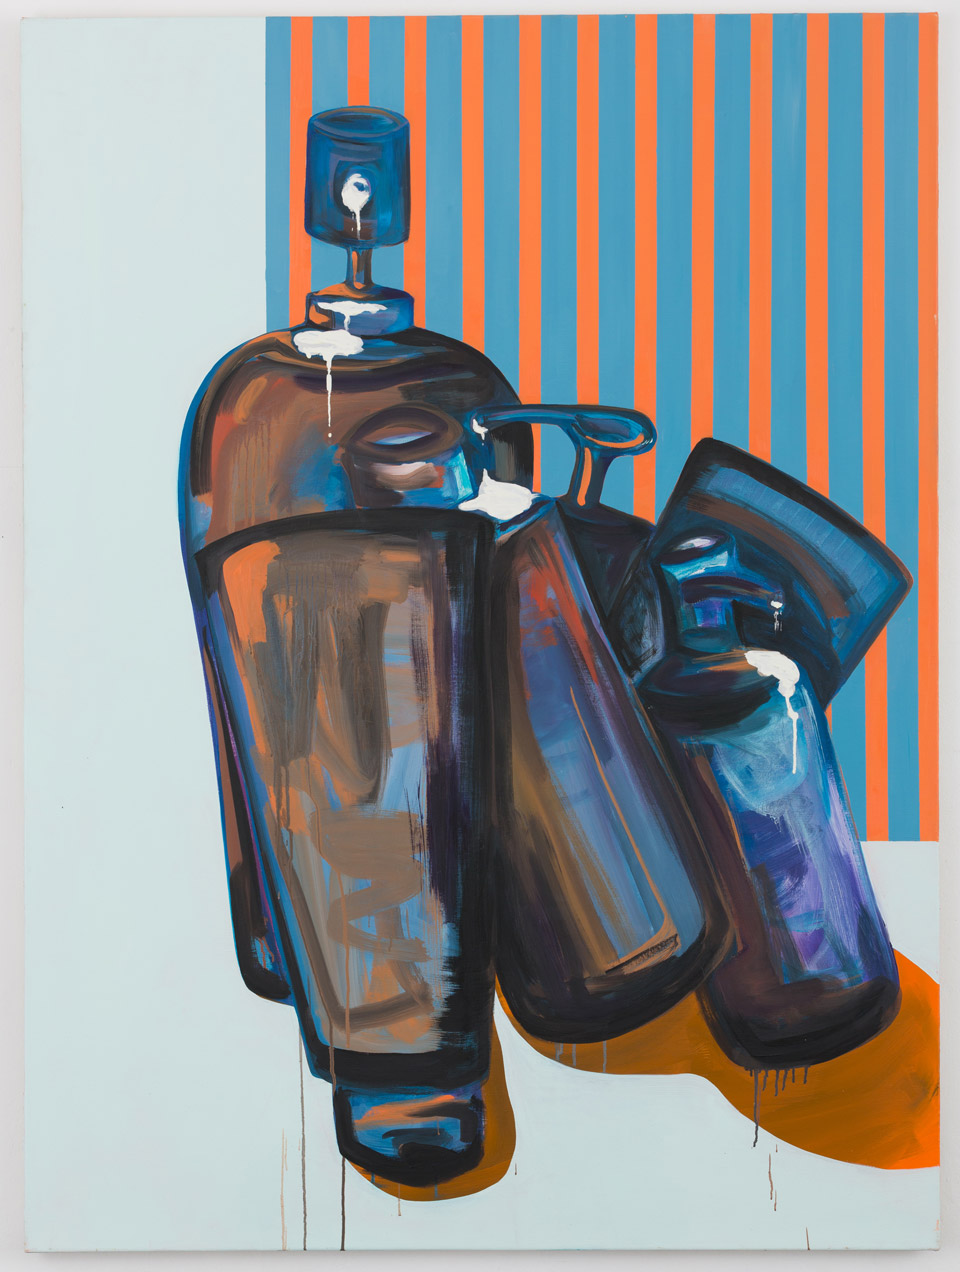 <p>Some Bottles, 2012, oil on canvas, 54 x 40 in</p>